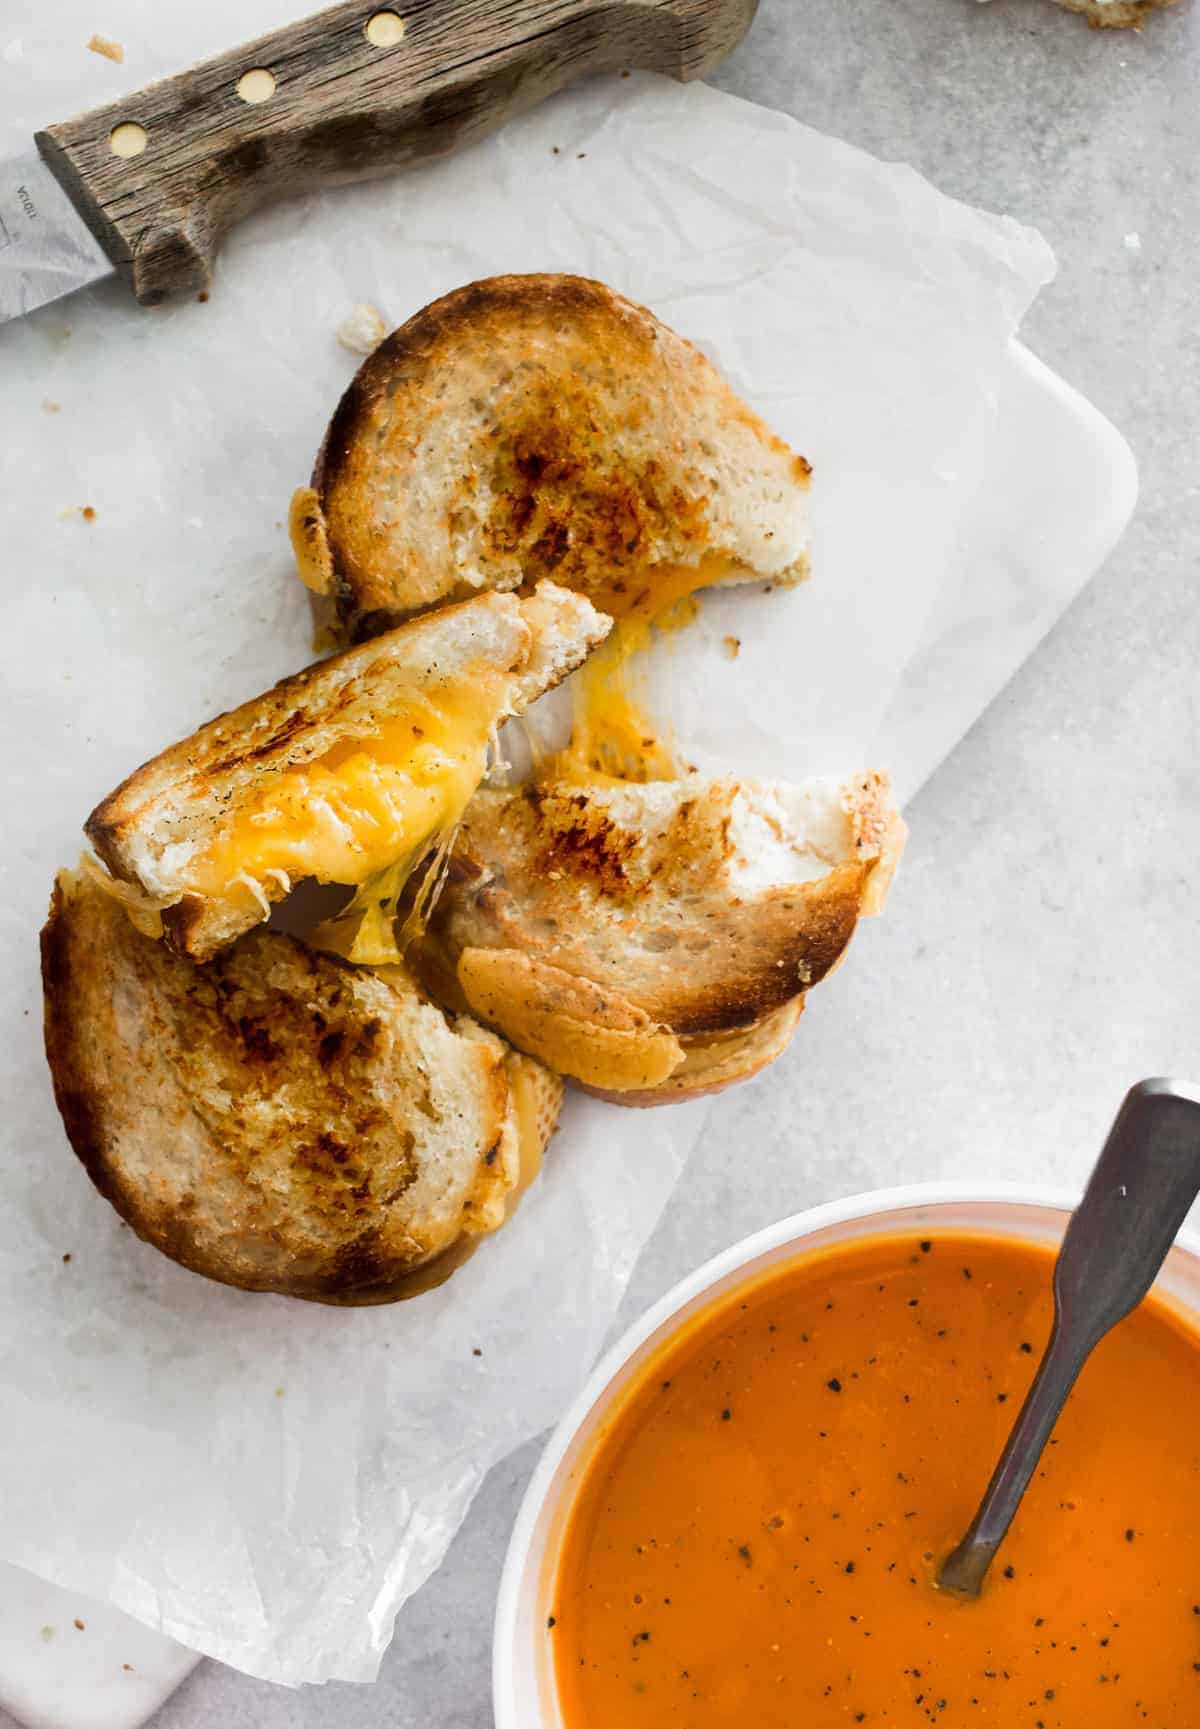 Grilled cheese next to tomato soup.